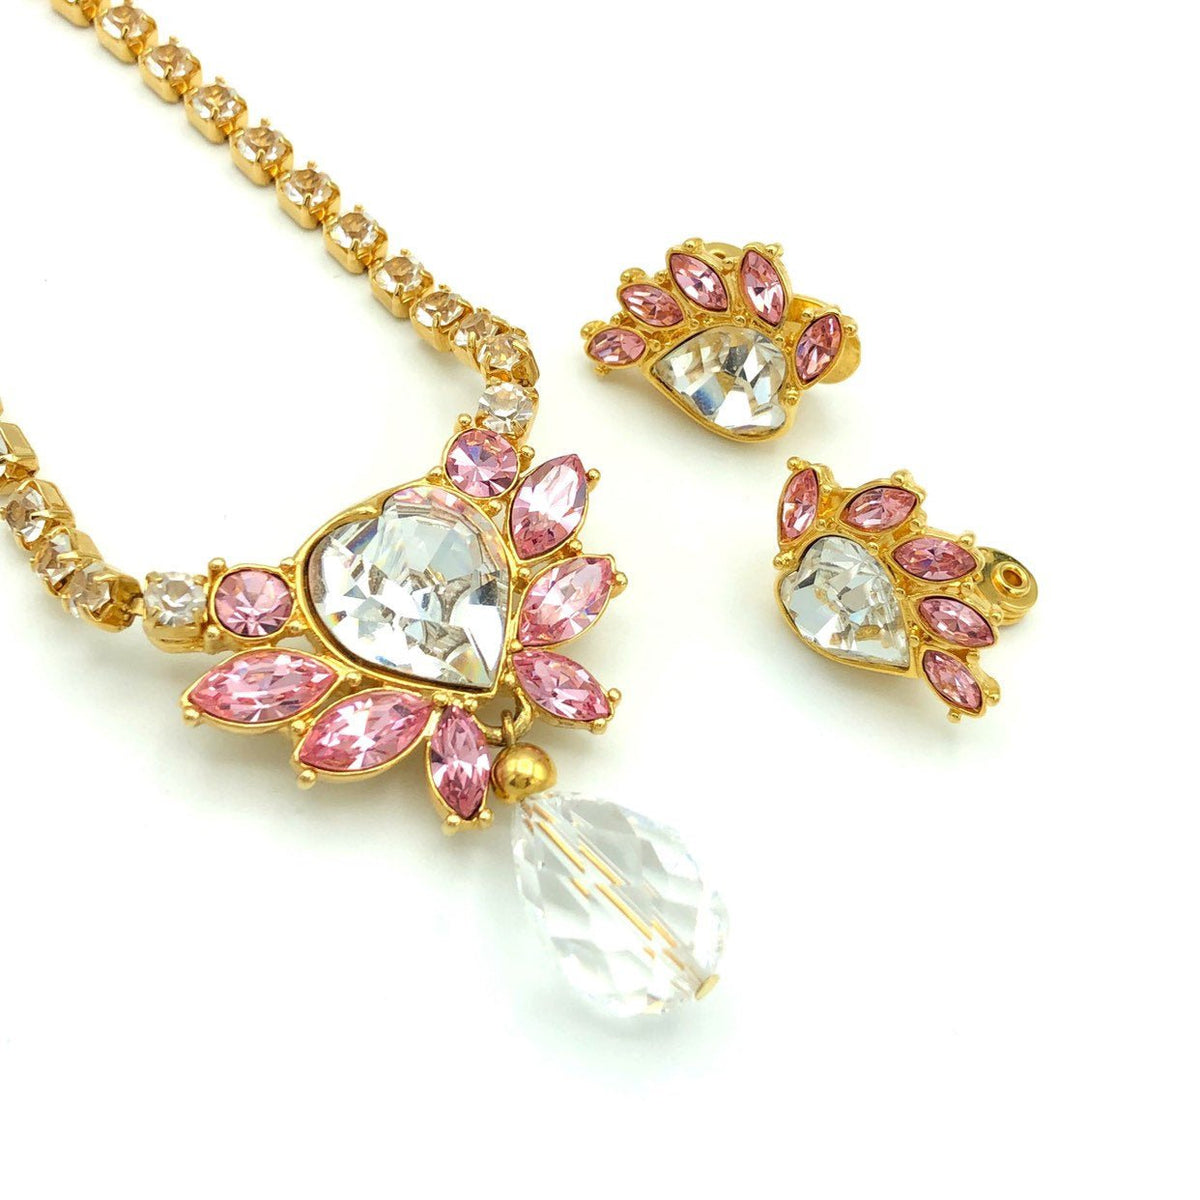 Vintage Monet Pink Crystal Heart Jewelry Set - 24 Wishes Vintage Jewelry